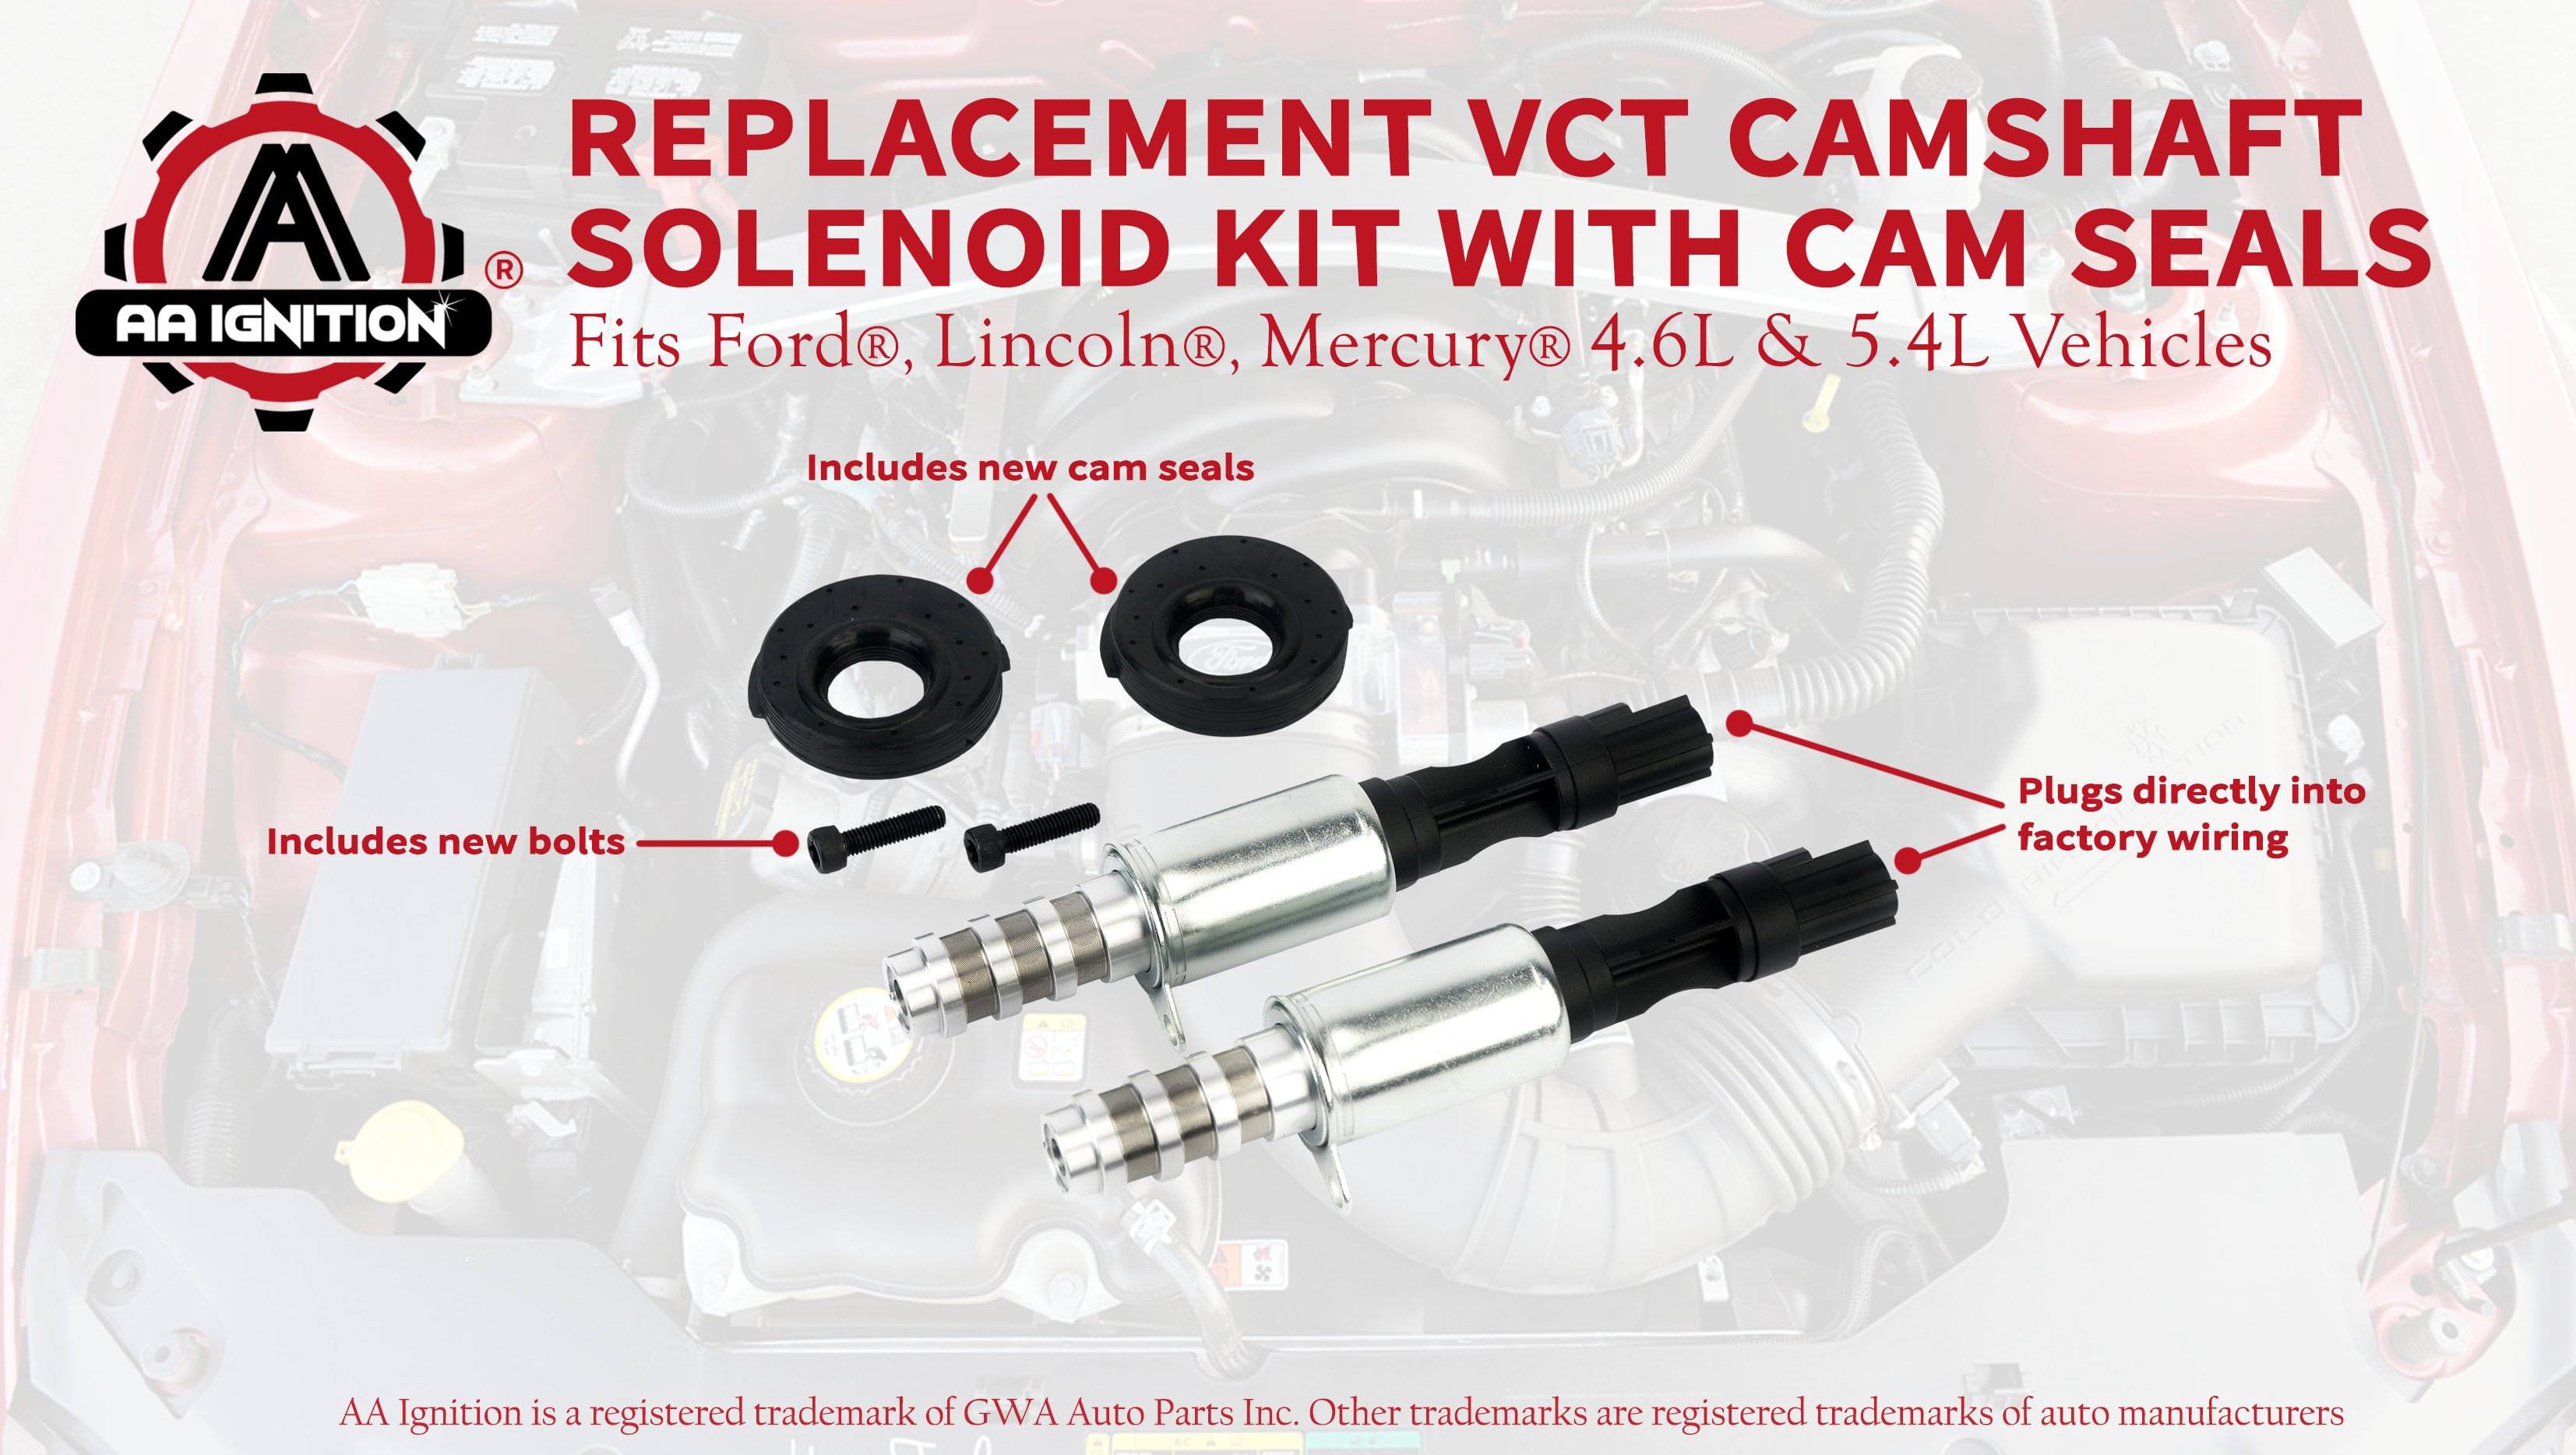 Camshaft Variable Valve Timing Solenoid VCT Replaces# 8L3Z-6M280-B Ford  Expedition, F150, Mustang, Sport Trac 3V 5.4L, 5.4, 4.6 2004, 2005, 2006,  2007, 2008  more Includes Solenoids  Cam Seal